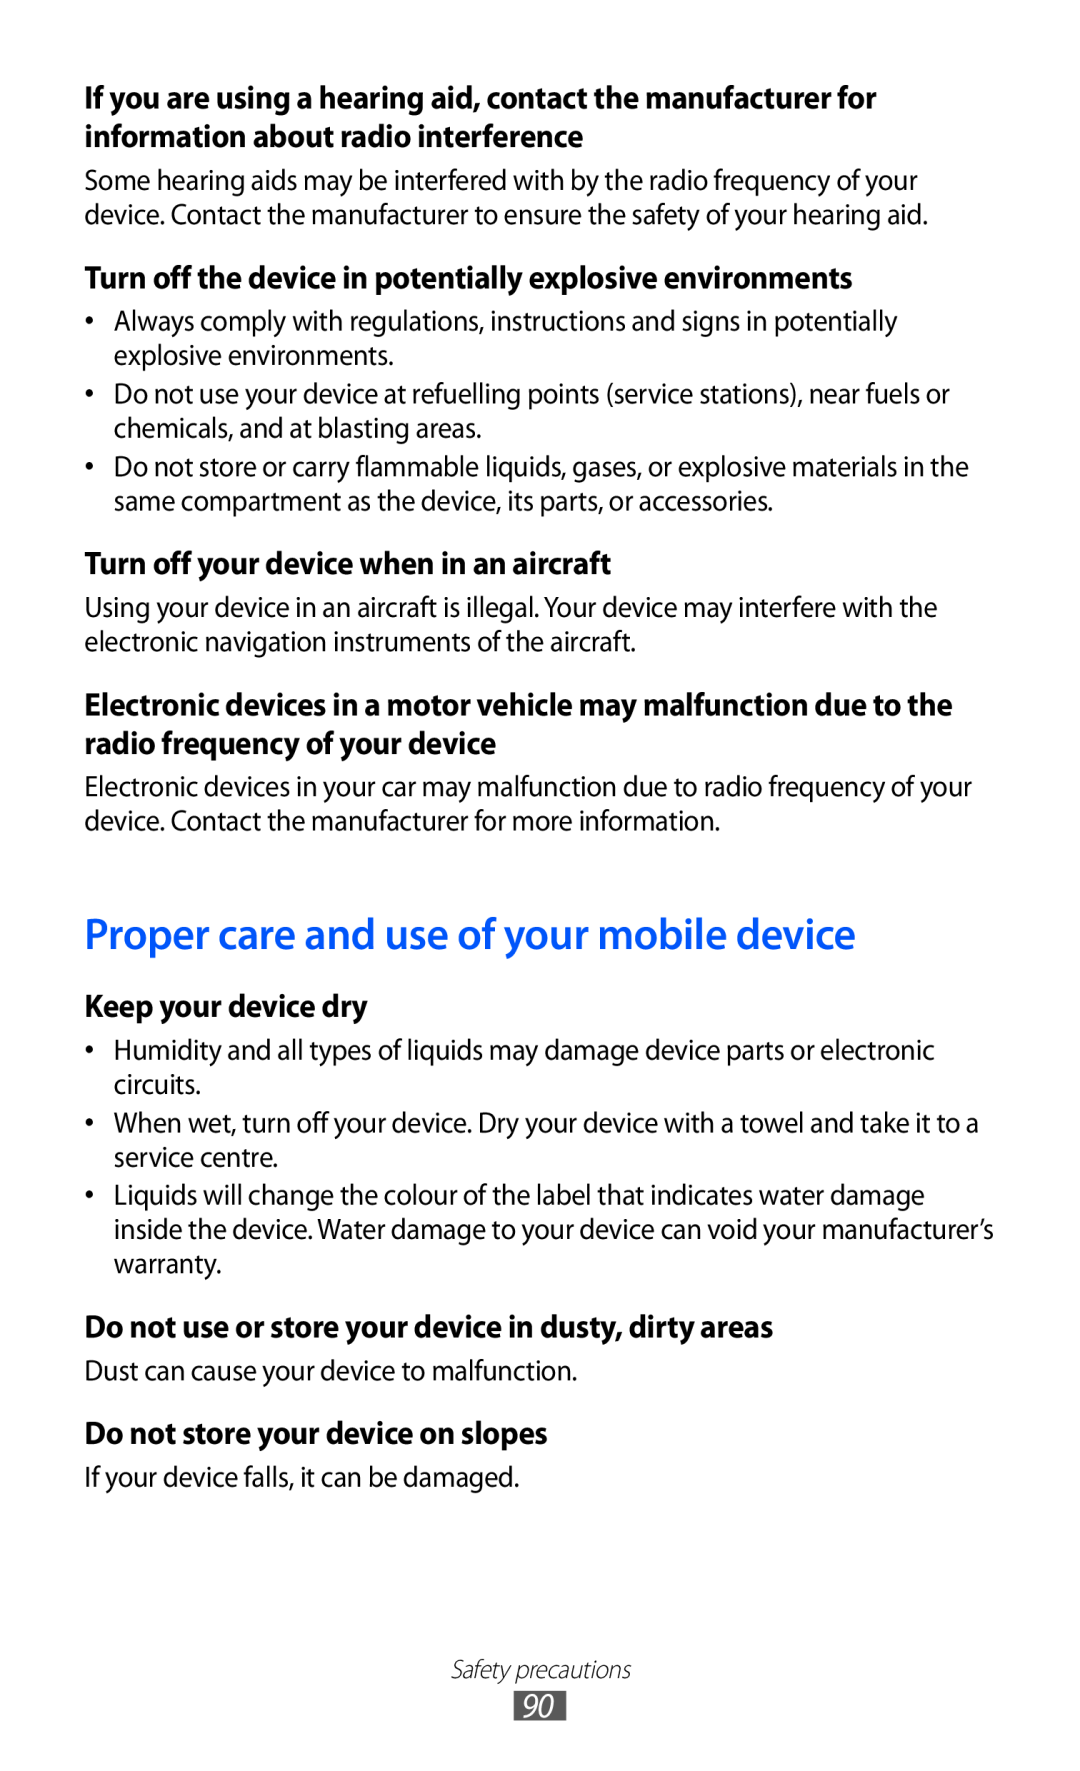 Samsung GT-P7510 Proper care and use of your mobile device, Turn off the device in potentially explosive environments 